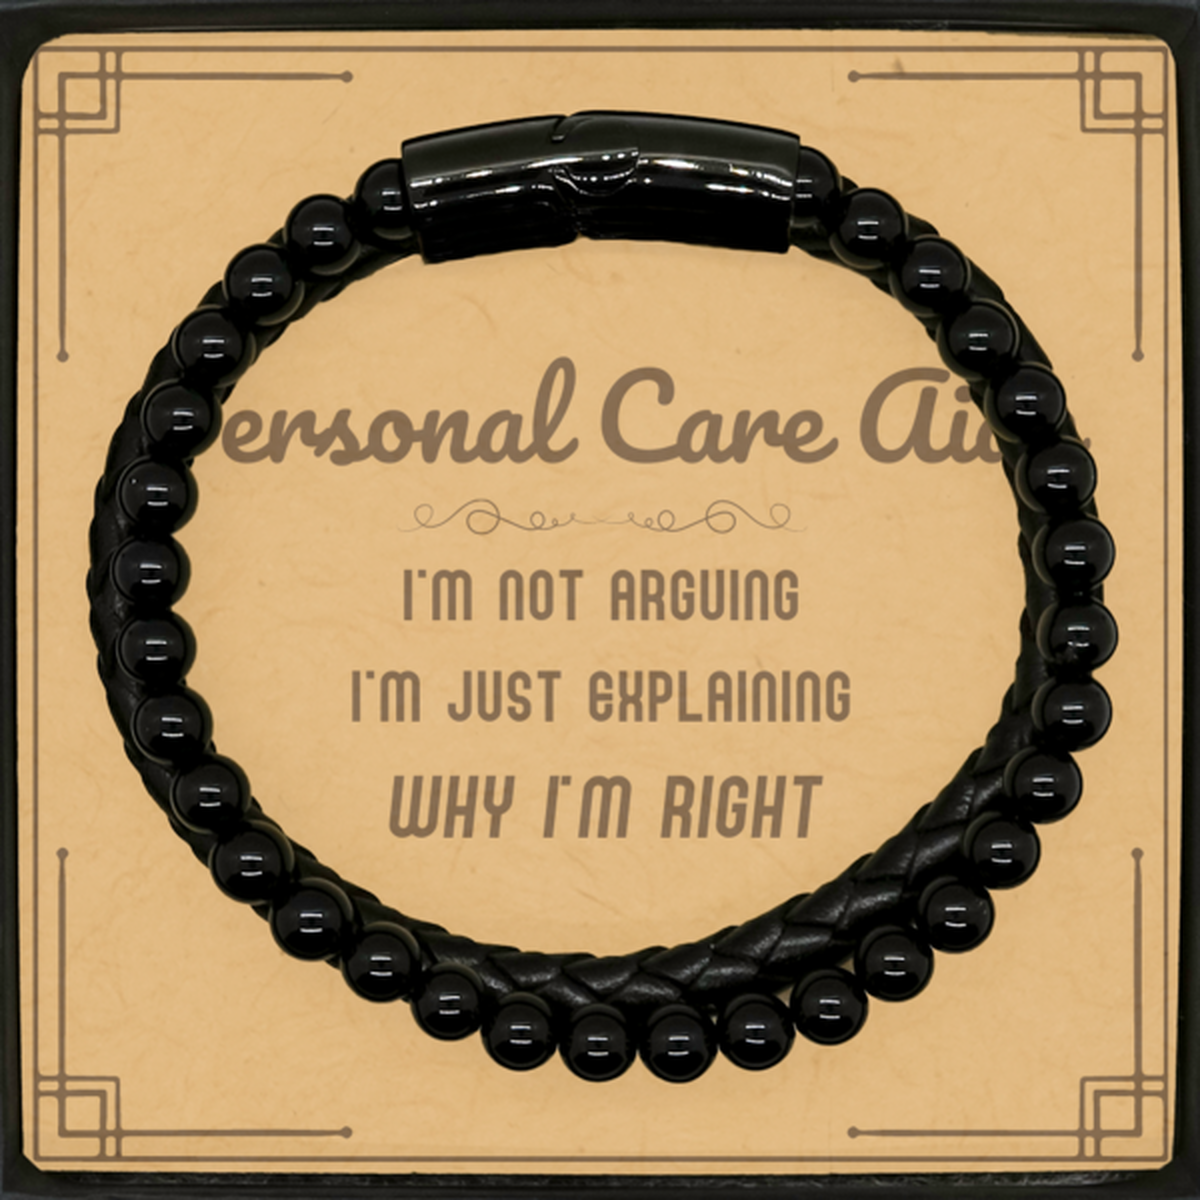 Personal Care Aide I'm not Arguing. I'm Just Explaining Why I'm RIGHT Stone Leather Bracelets, Funny Saying Quote Personal Care Aide Gifts For Personal Care Aide Message Card Graduation Birthday Christmas Gifts for Men Women Coworker